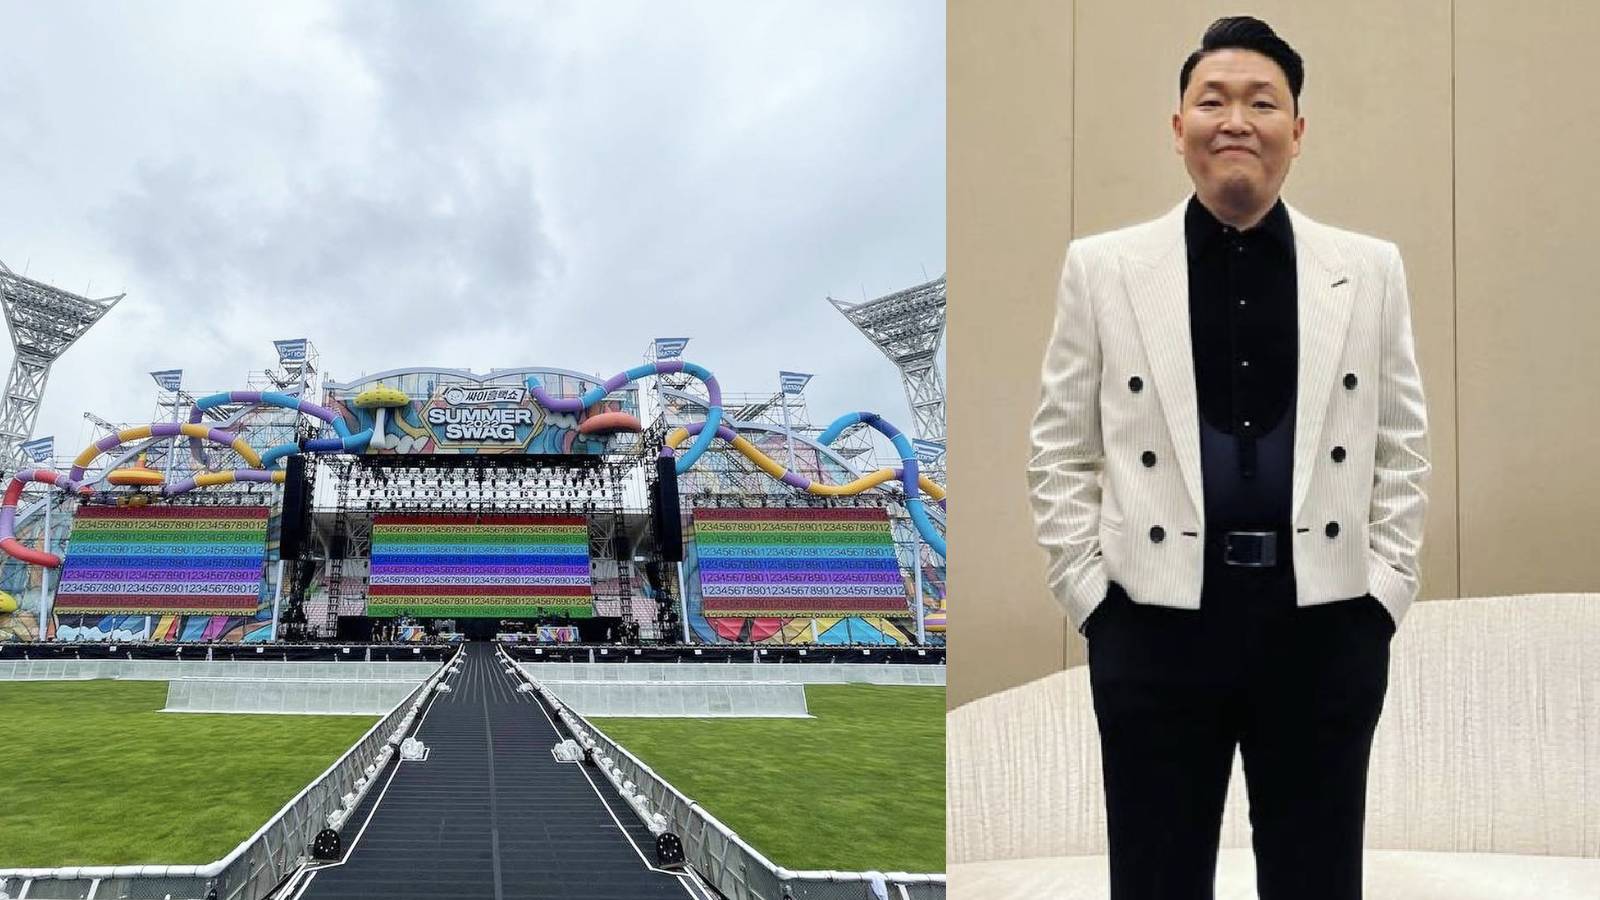 Construction Worker Pronounced Dead After Falling 15m While Dismantling PSY’s Concert Stage